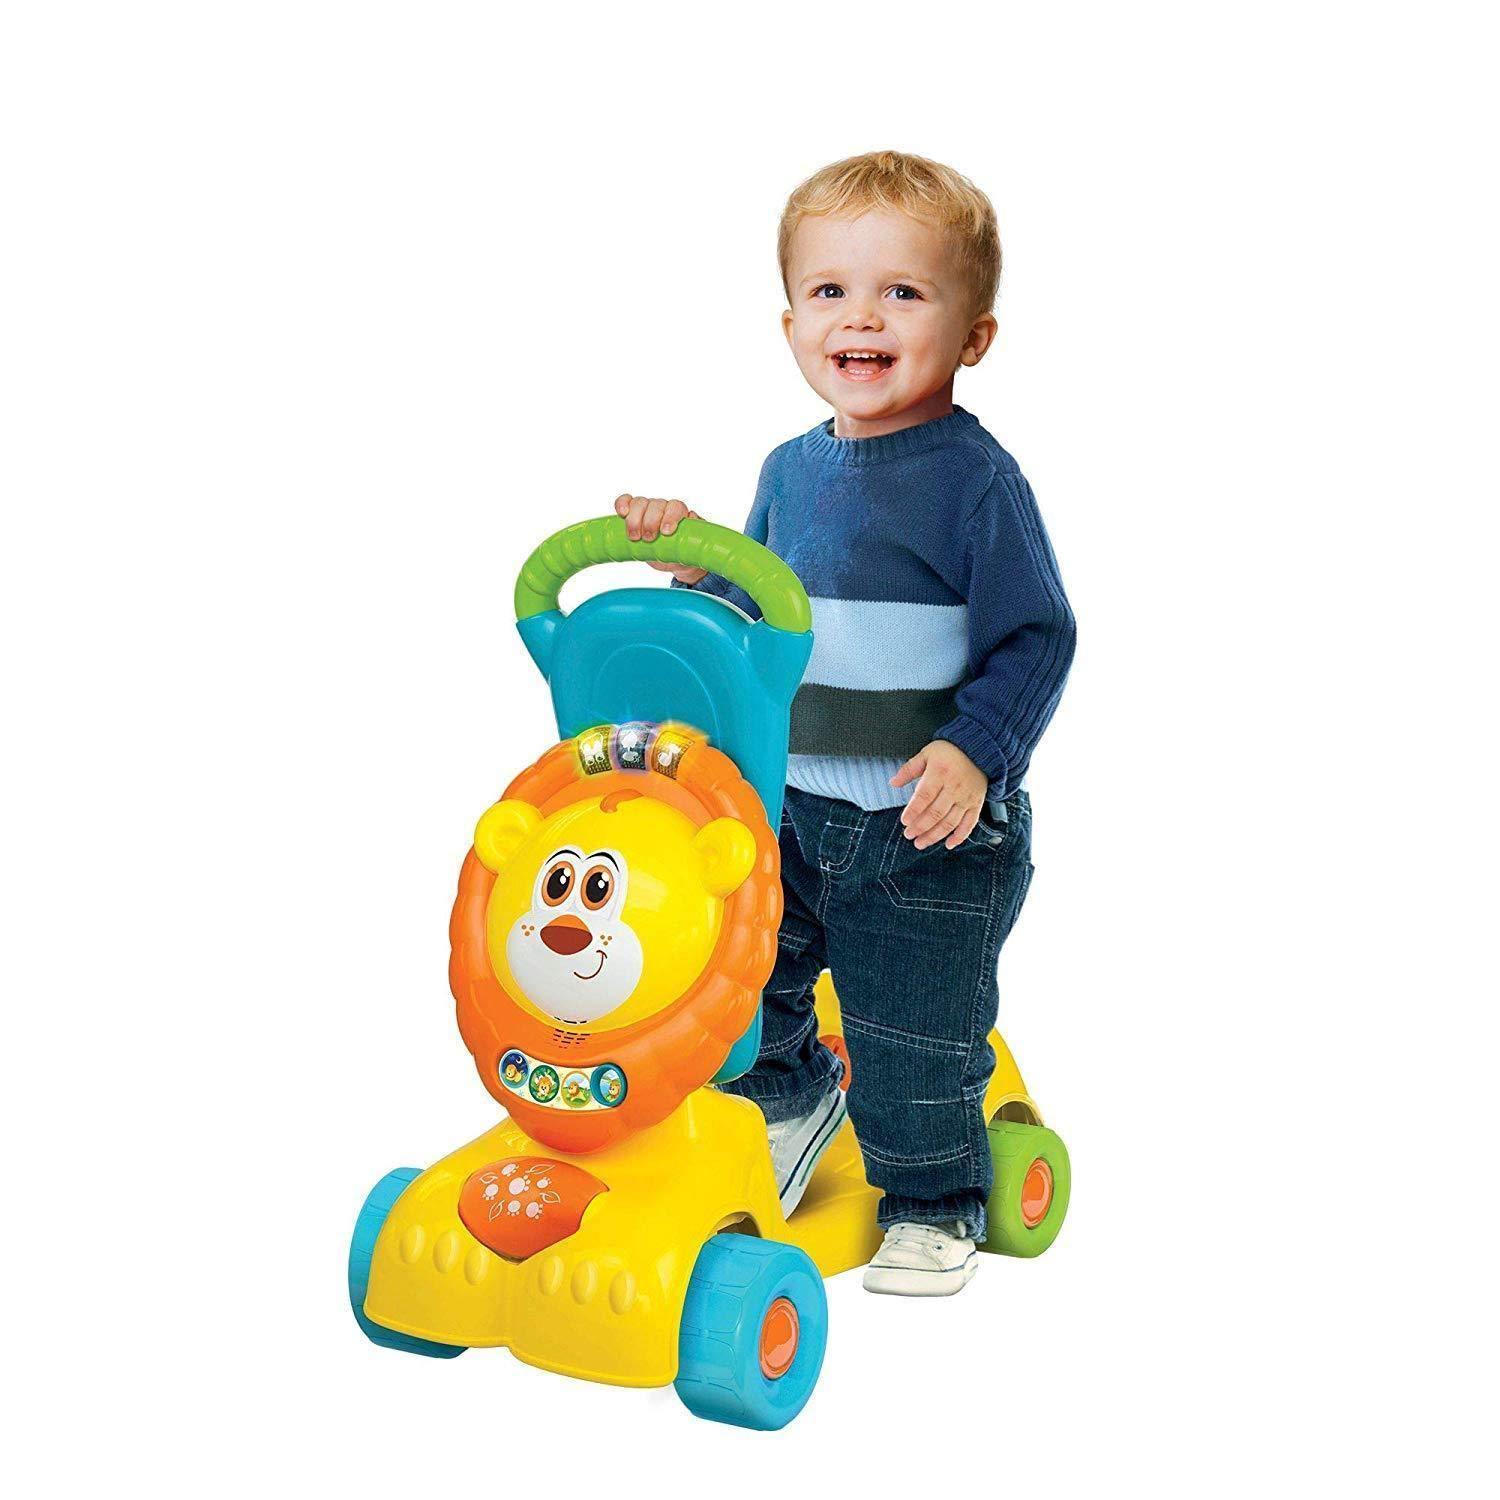 WinFun 3 In 1 Grow With Me Ride On Lion Scooter - BumbleToys - 2-4 Years, Cecil, Pre-Order, Unisex, Walker